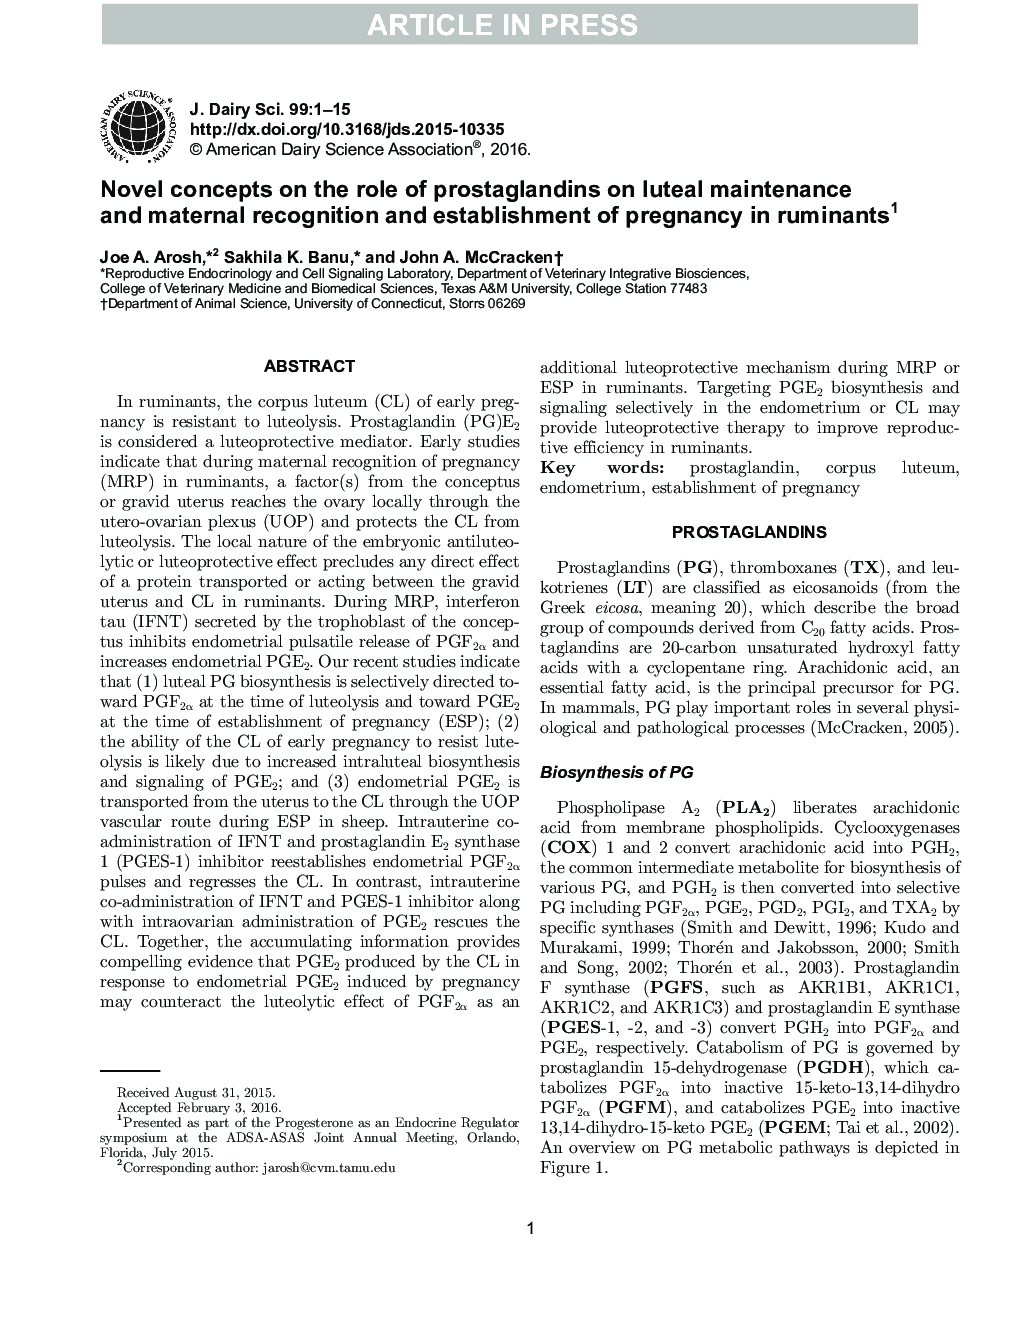 Novel concepts on the role of prostaglandins on luteal maintenance and maternal recognition and establishment of pregnancy in ruminants1